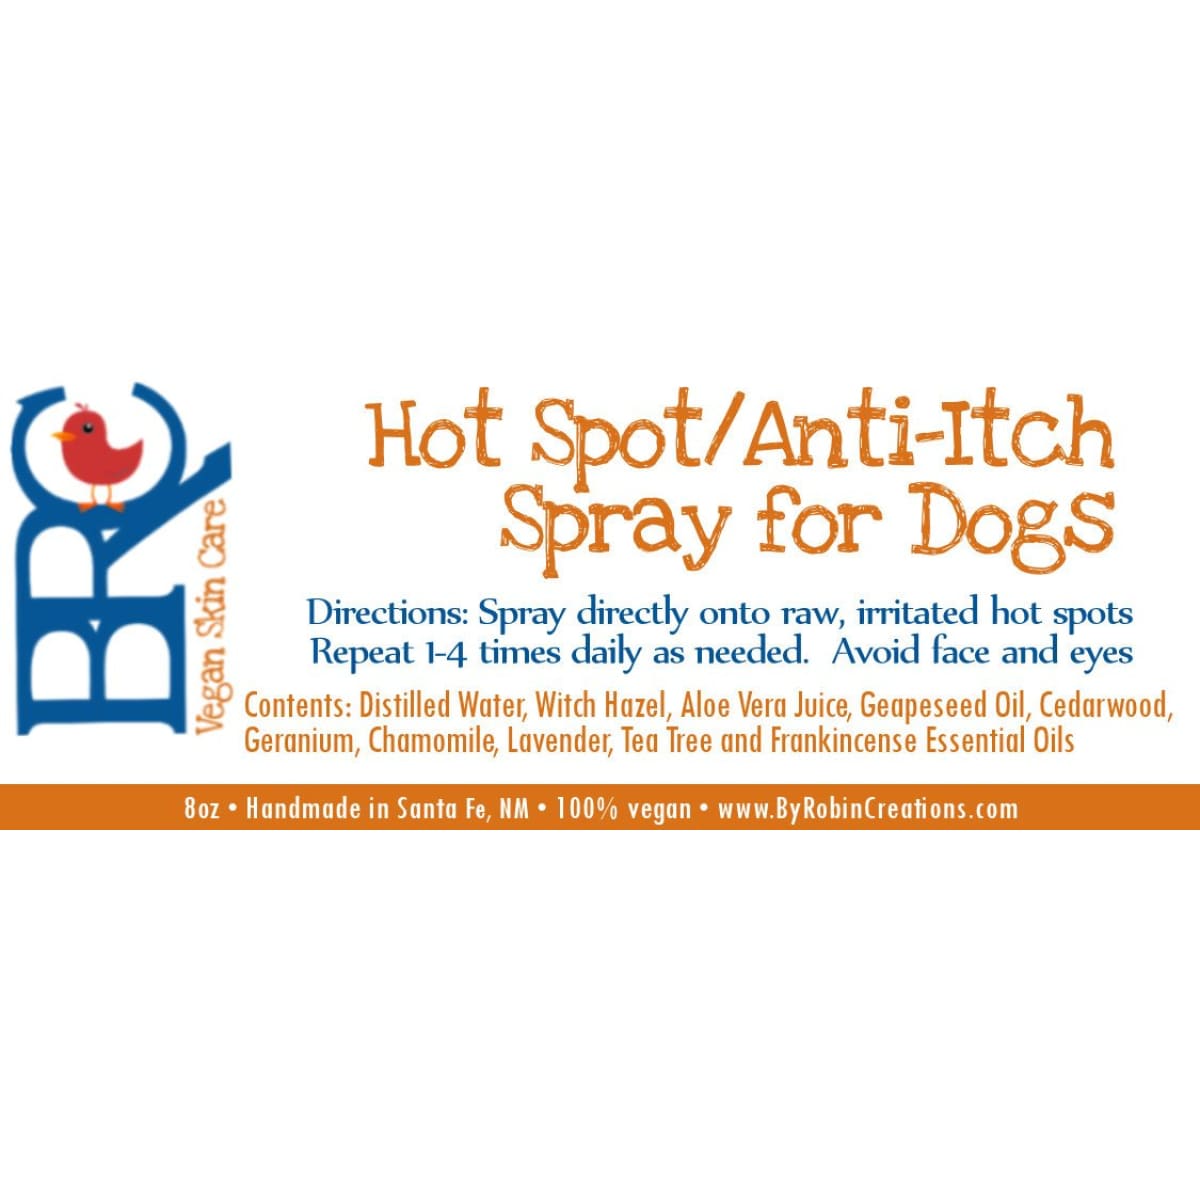 Vegan Anti-Itch and Hotspot Spray for Dogs